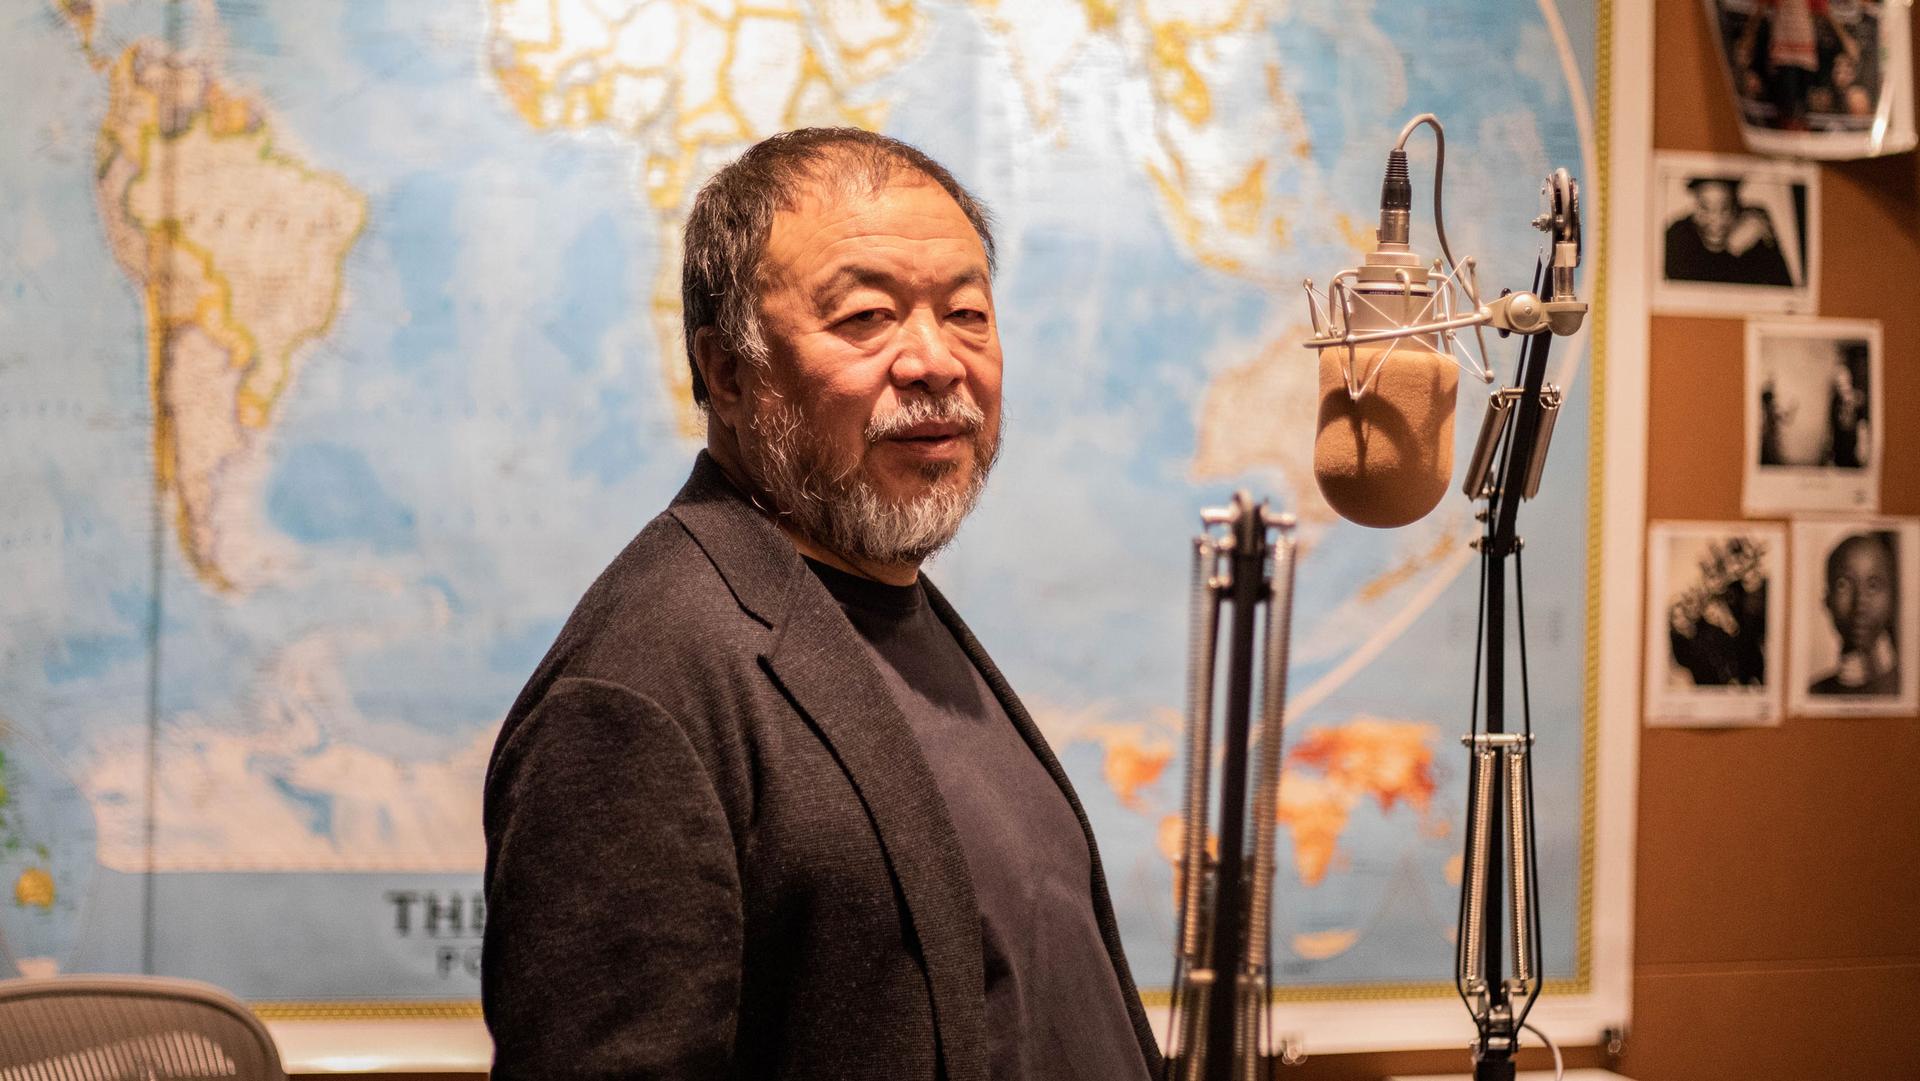 Ai Weiwei looks at the camera as he stands in front of a microphone